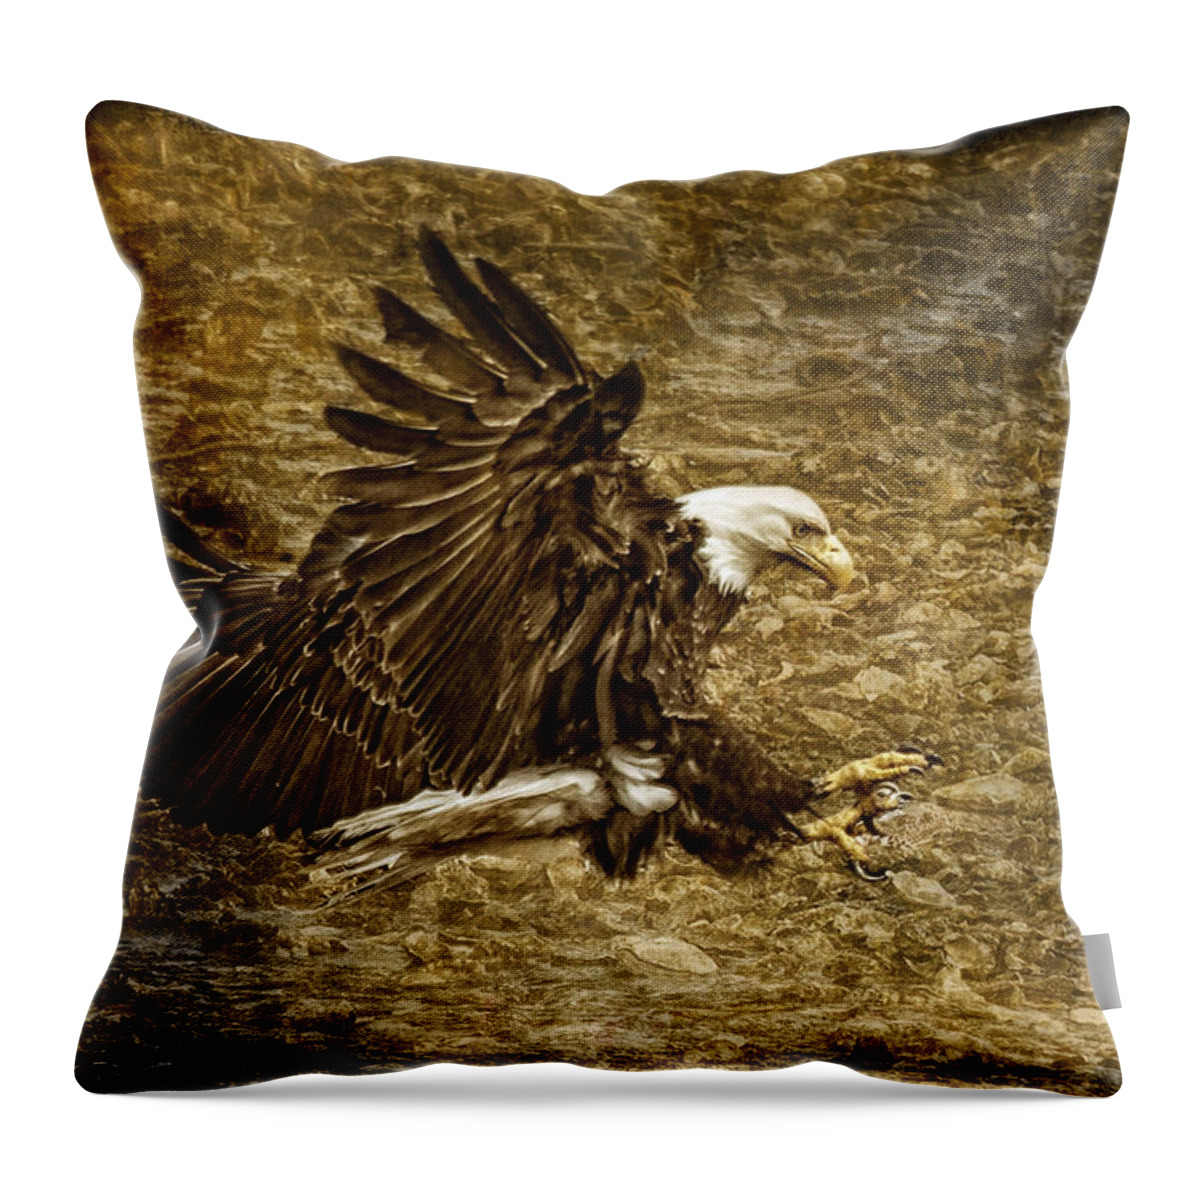 Bald Eagle Capture Throw Pillow featuring the photograph Bald Eagle Capture by Wes and Dotty Weber